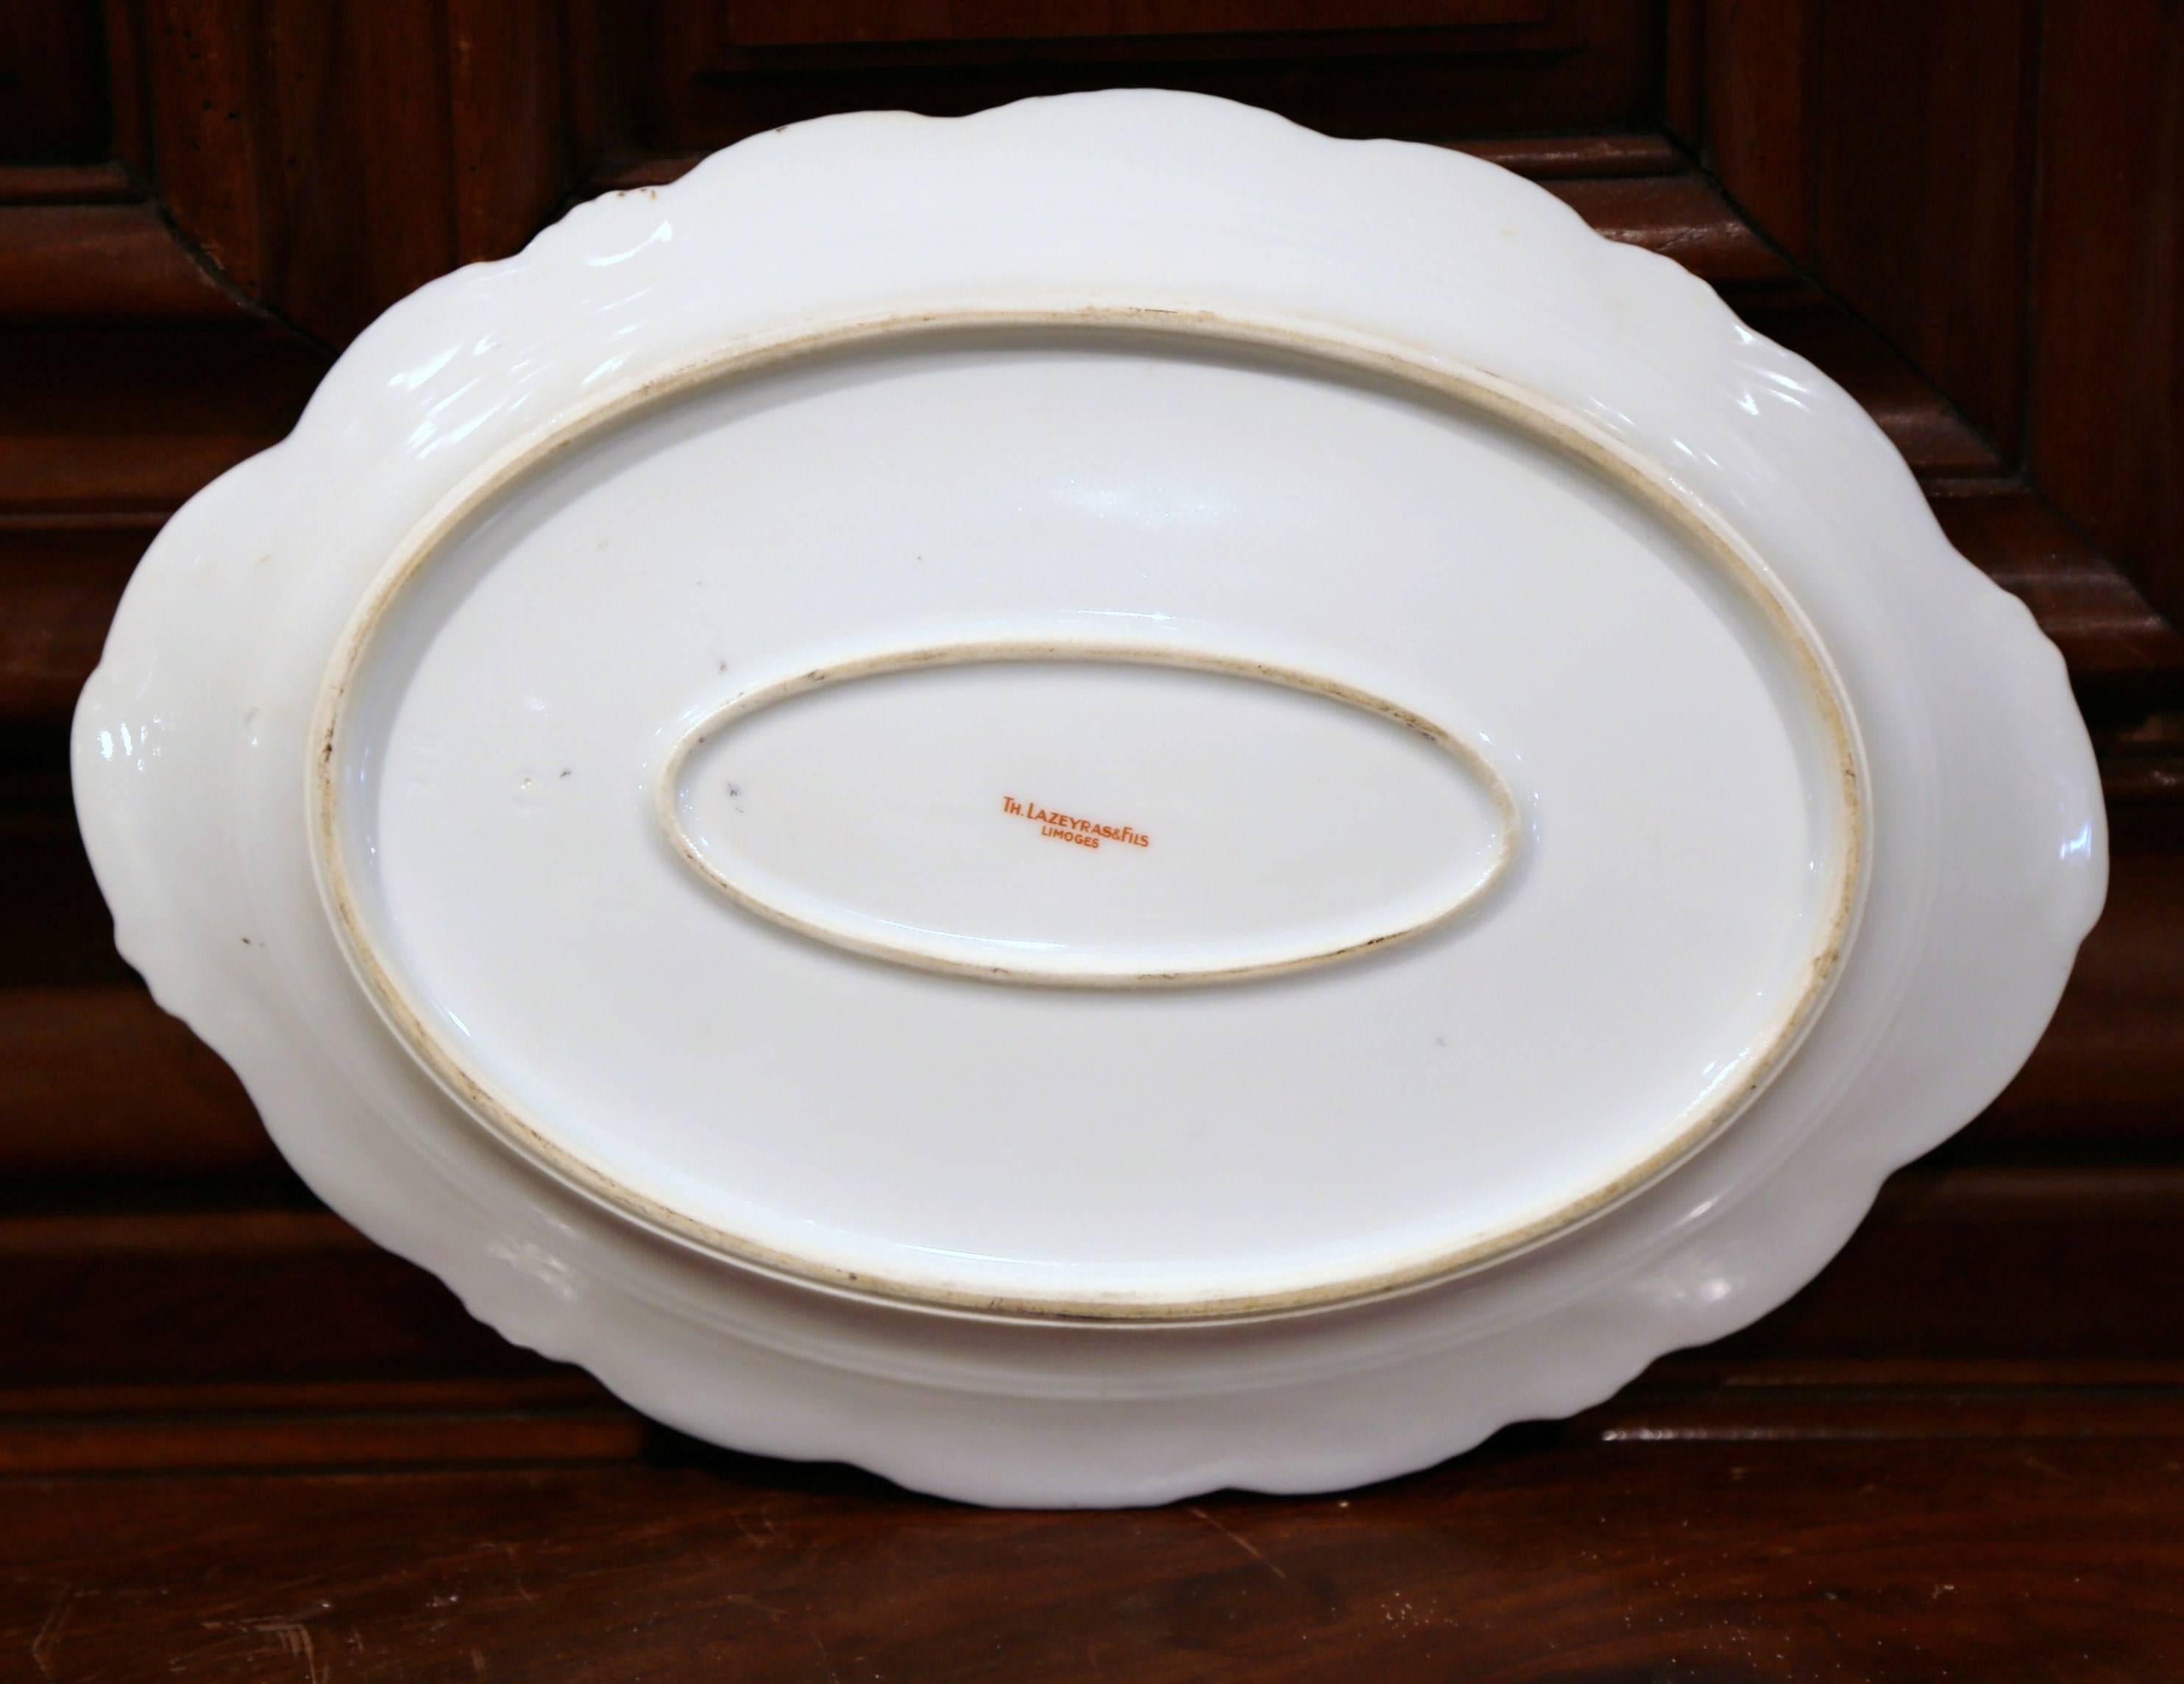 Early 20th Century French Hand-Painted Porcelain Plate with Sheep from Limoges 1